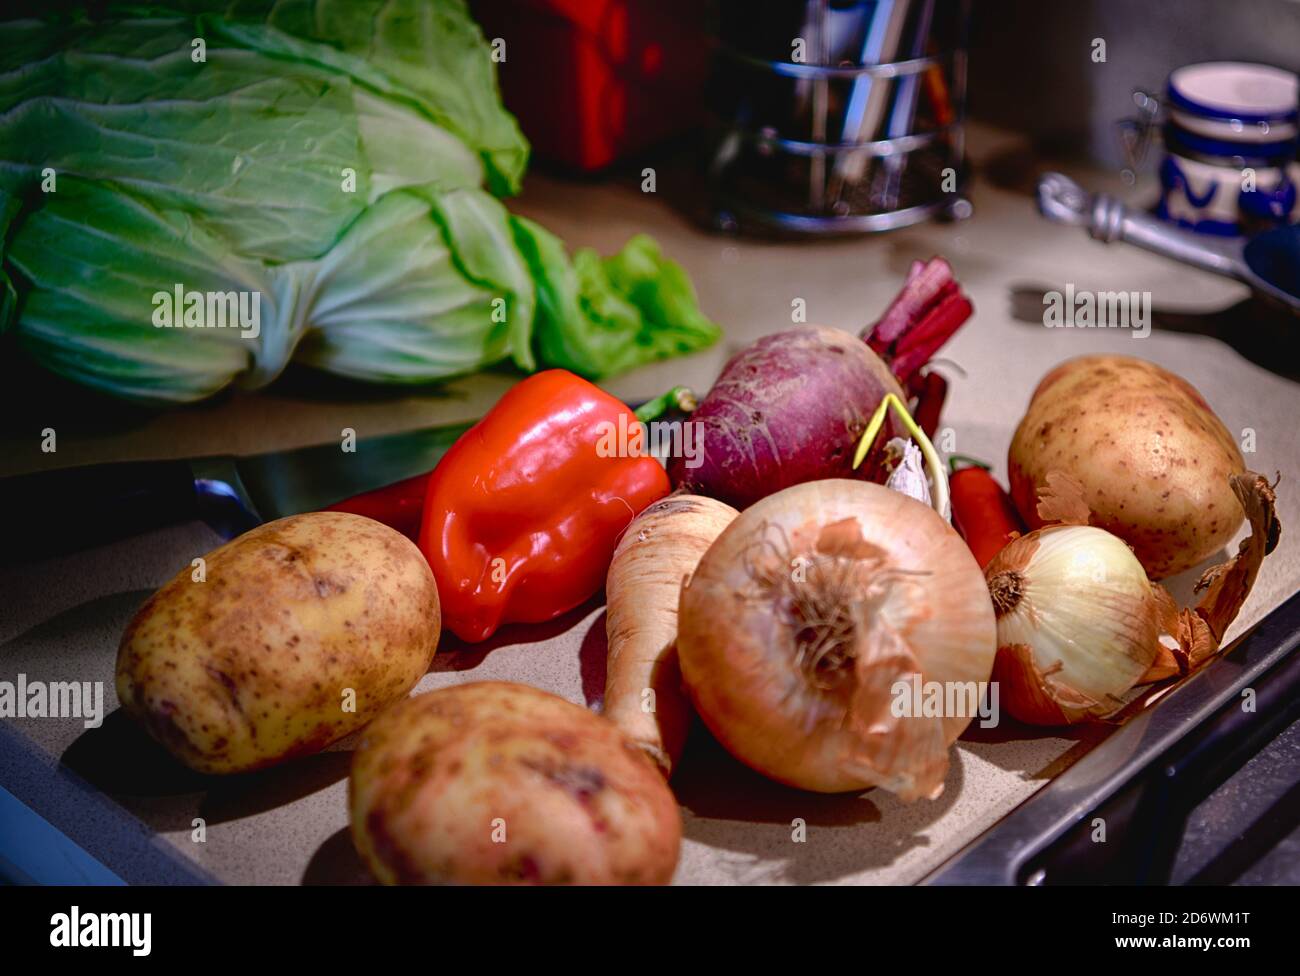 A set of vegetables for cooking Stock Photo